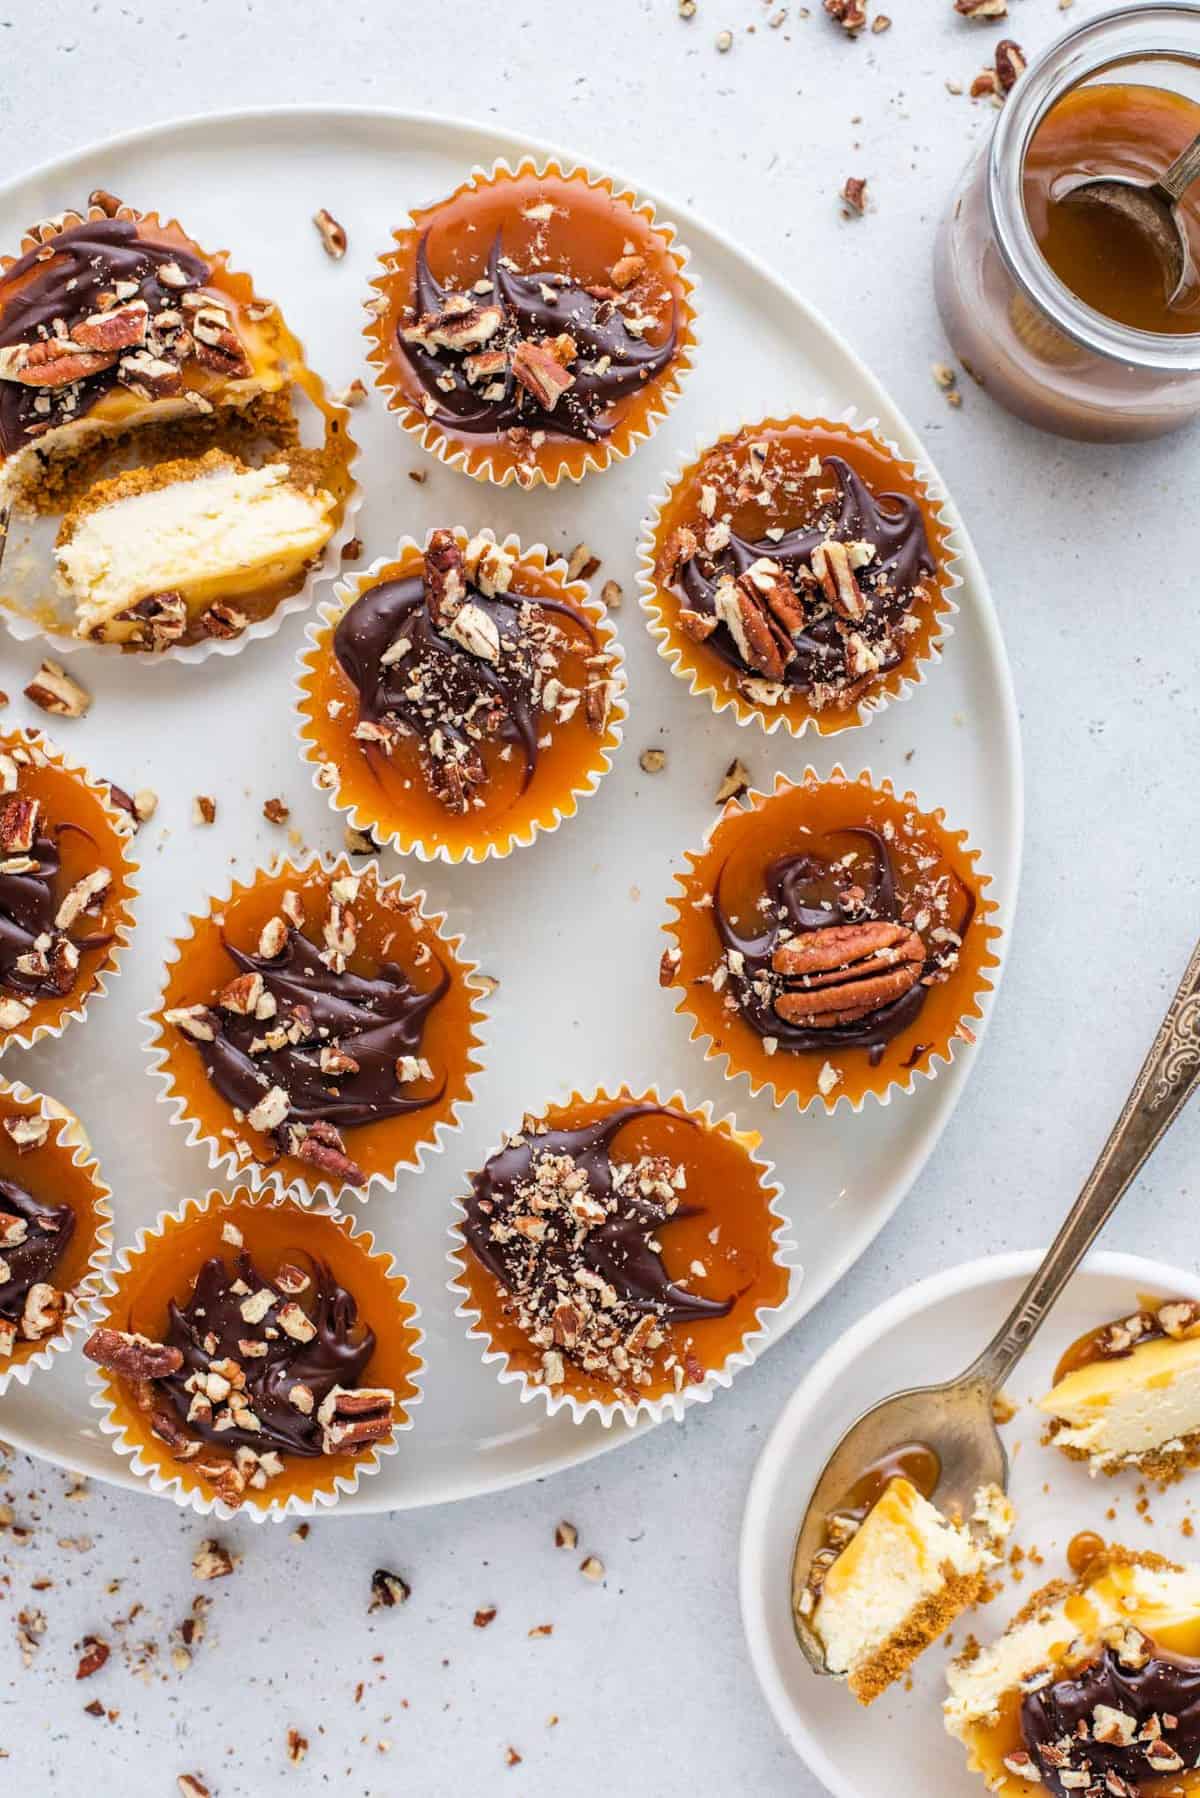 mini cheesecakes topped with caramel, chocolate and chopped pecans arranged on white tray